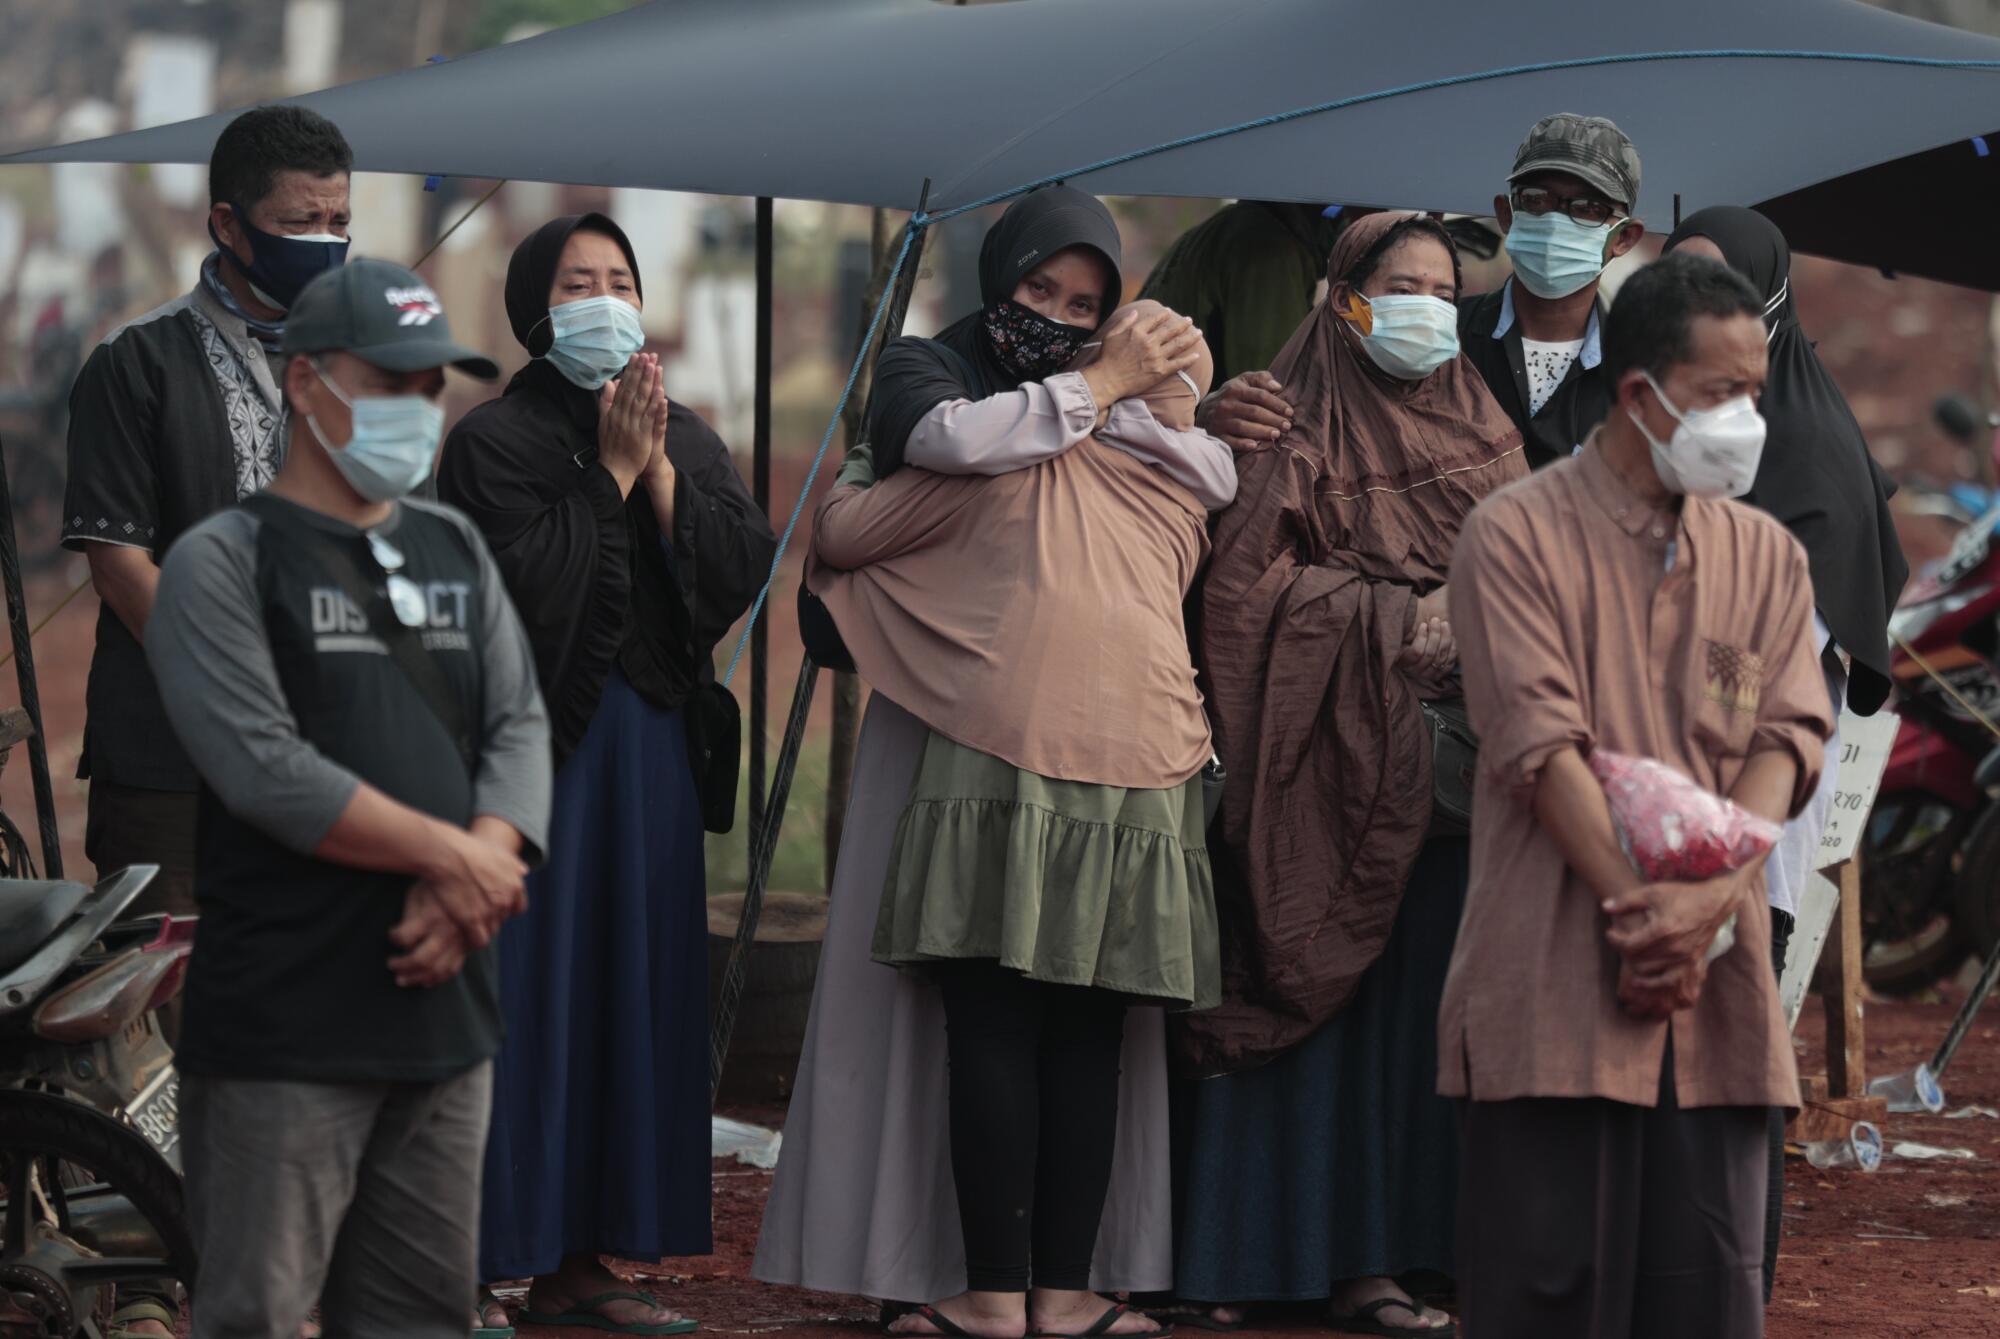 People wearing face masks attend a burial.